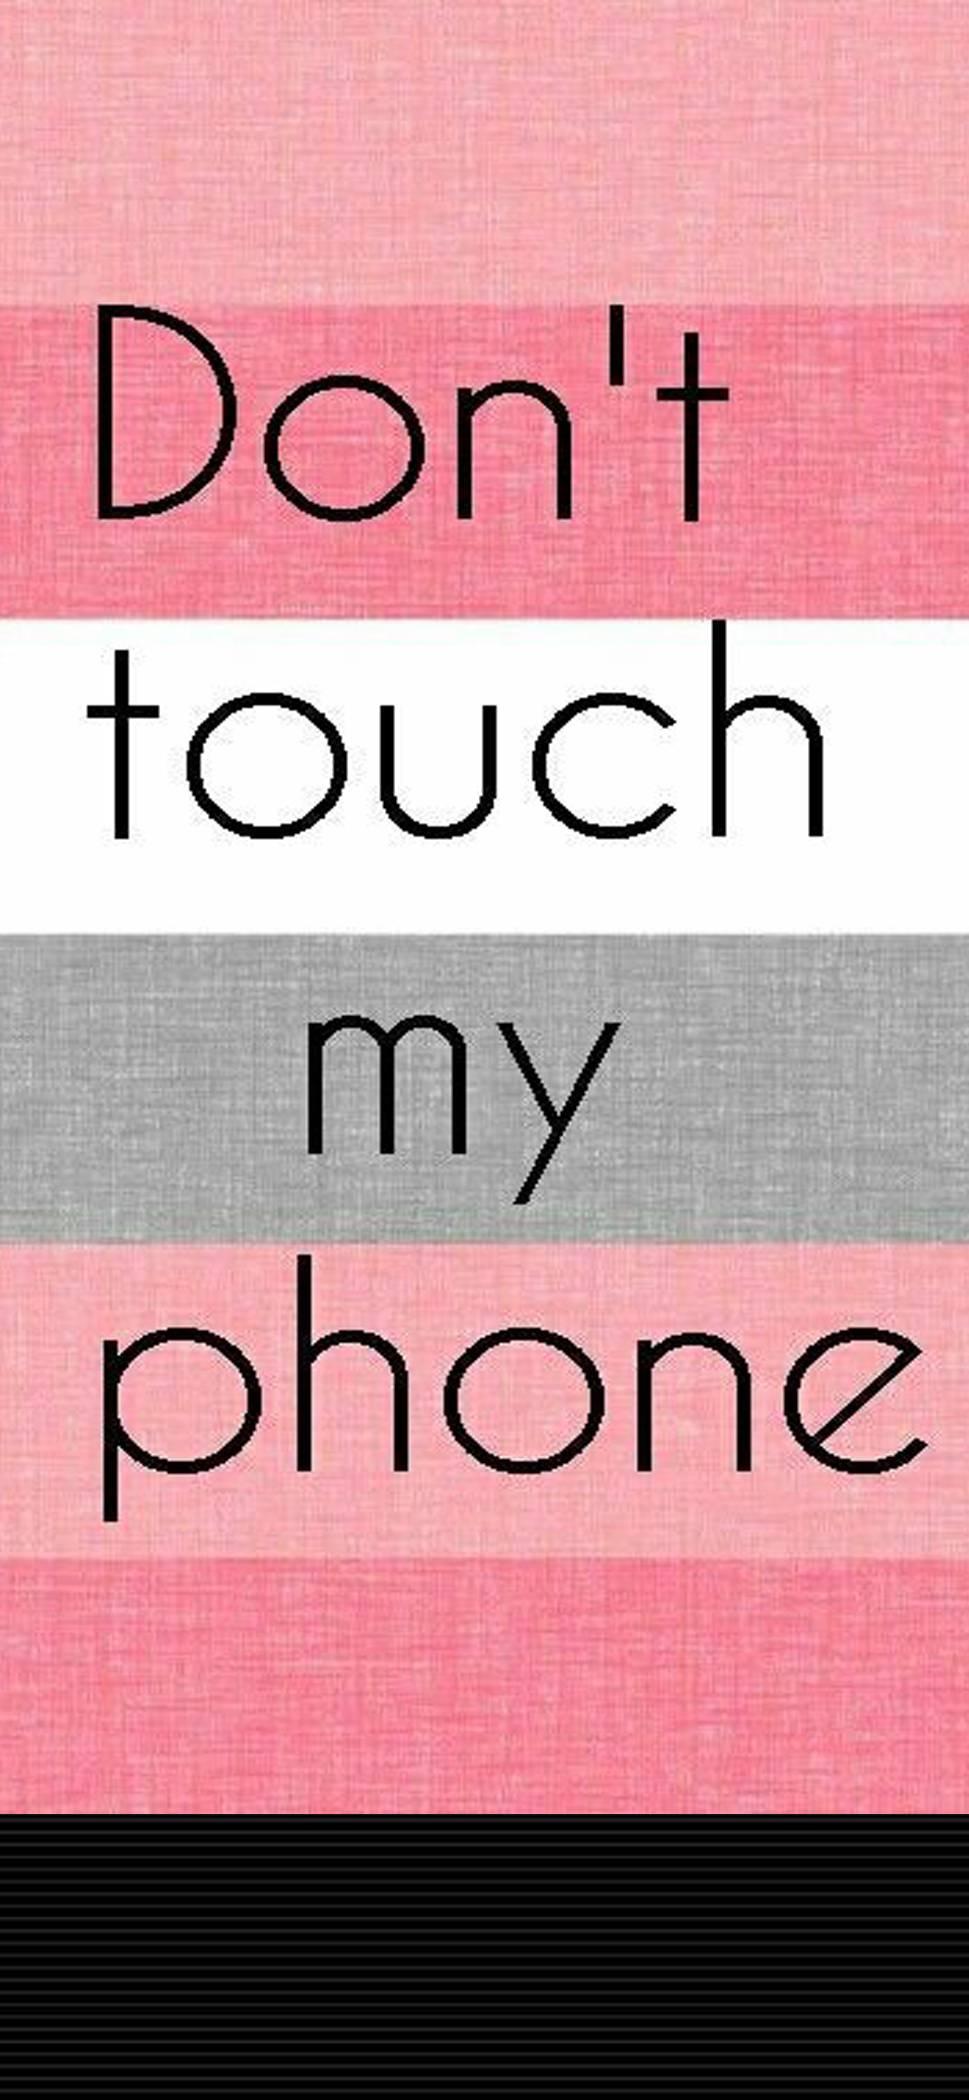 Don't touch my phone by person - Don't touch my phone